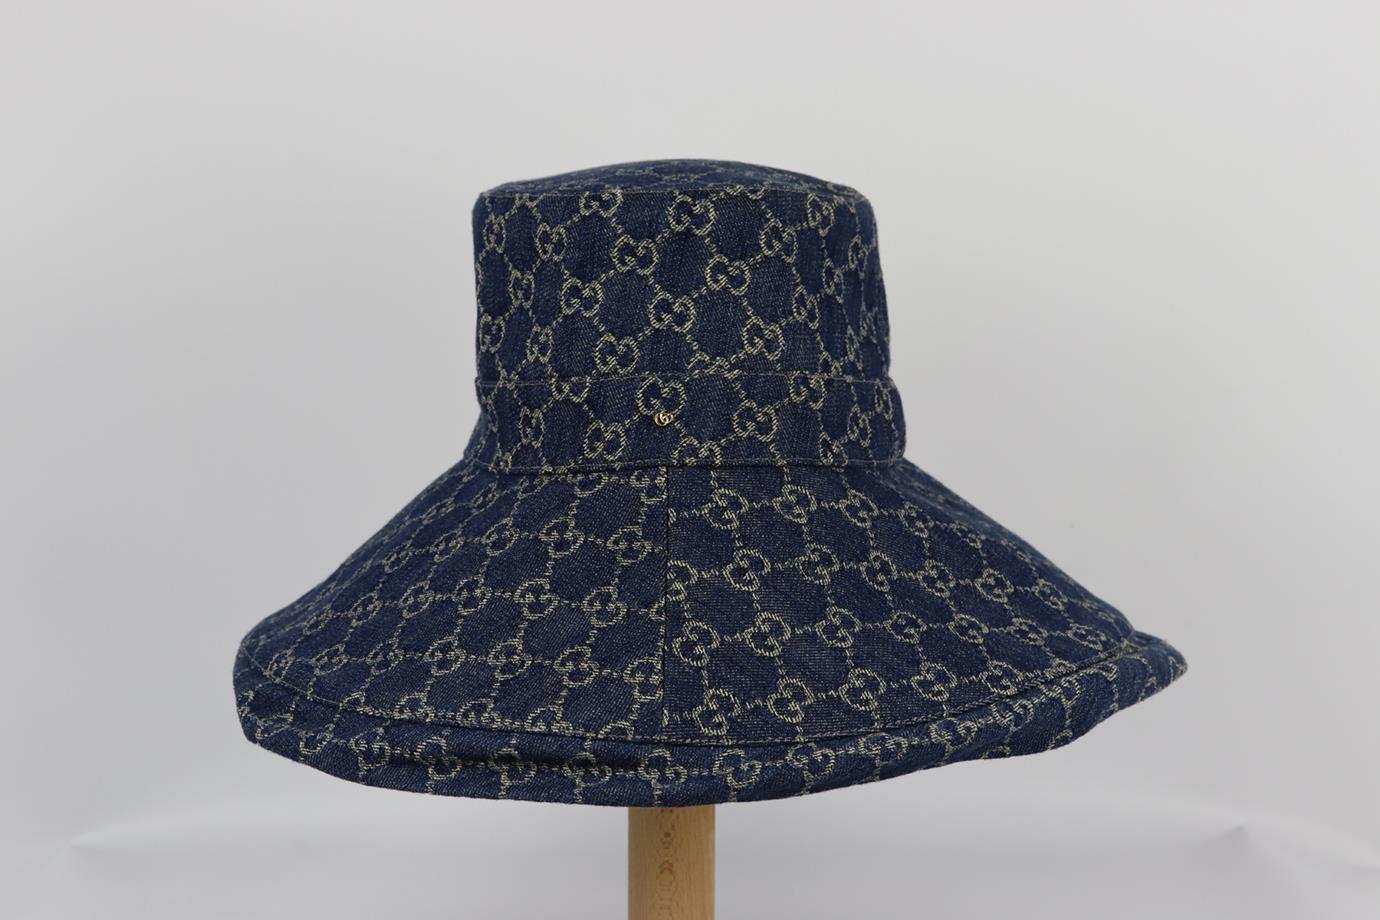 Gucci gg jacquard denim hat. Blue. Slips on. 100% Organic cotton; lining: 100% organic cotton. Does not come with dustbag or box. Size: Medium. Circumference: 21.9 in. Brim Width: 5.5 in. Very good condition - Worn once. No sign of wear; see